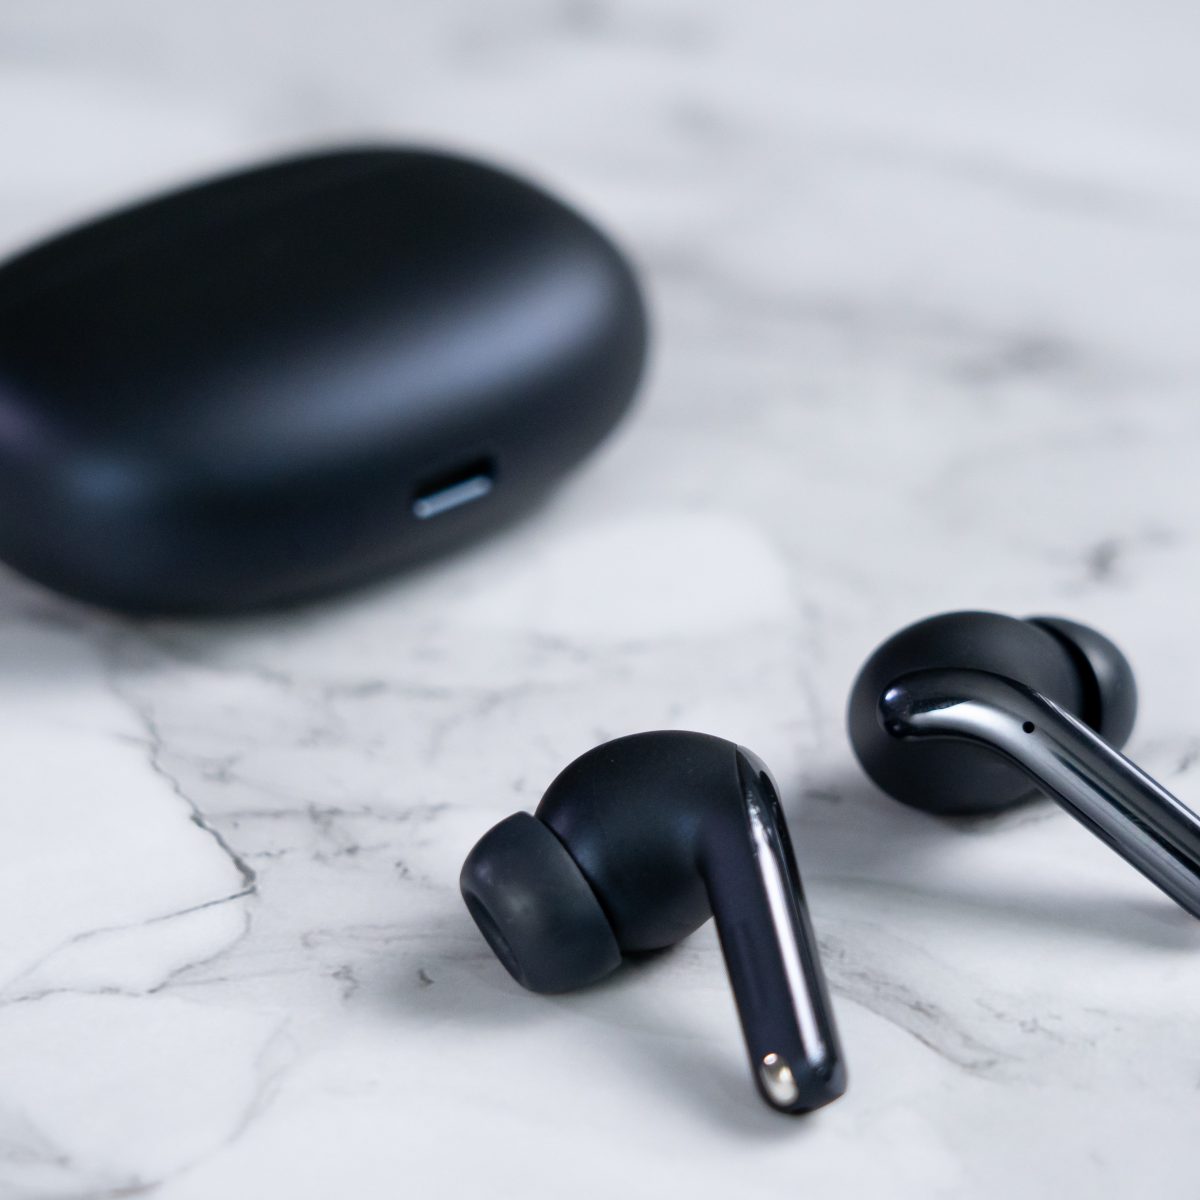 How To Connect Biconic Wireless Earbuds